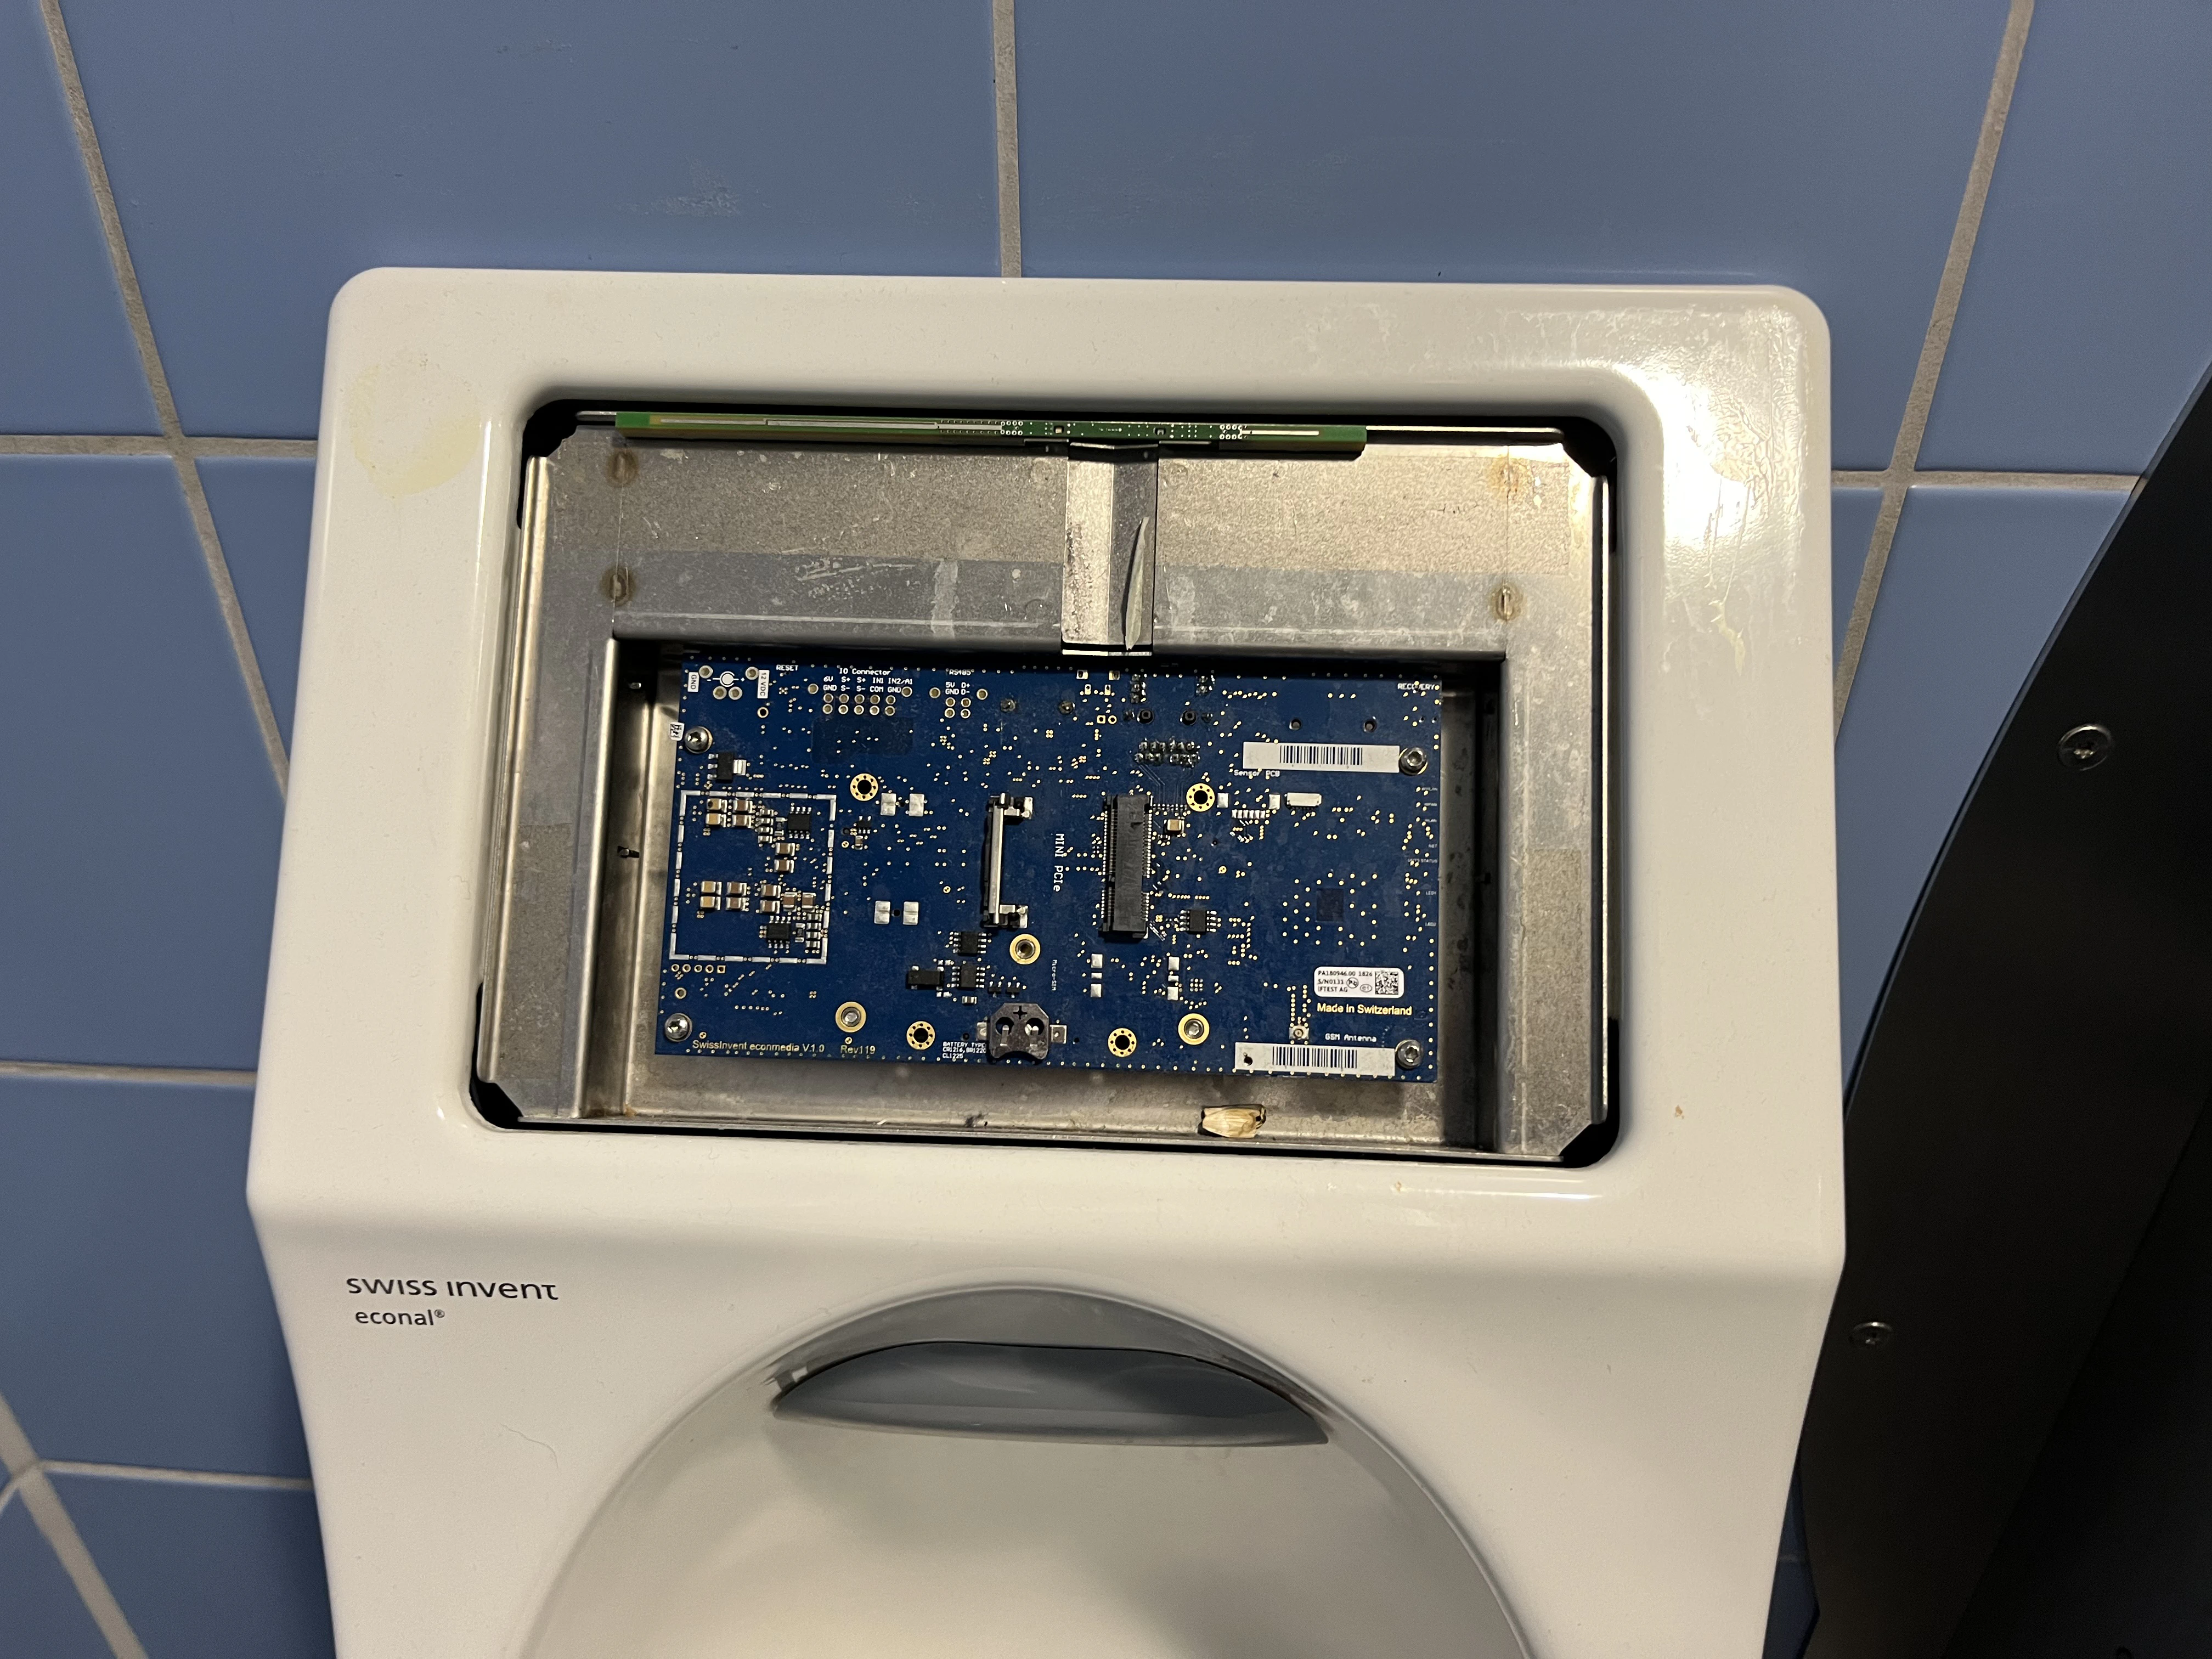 Urinal showing an exposed embedded board, the display seems to be missing